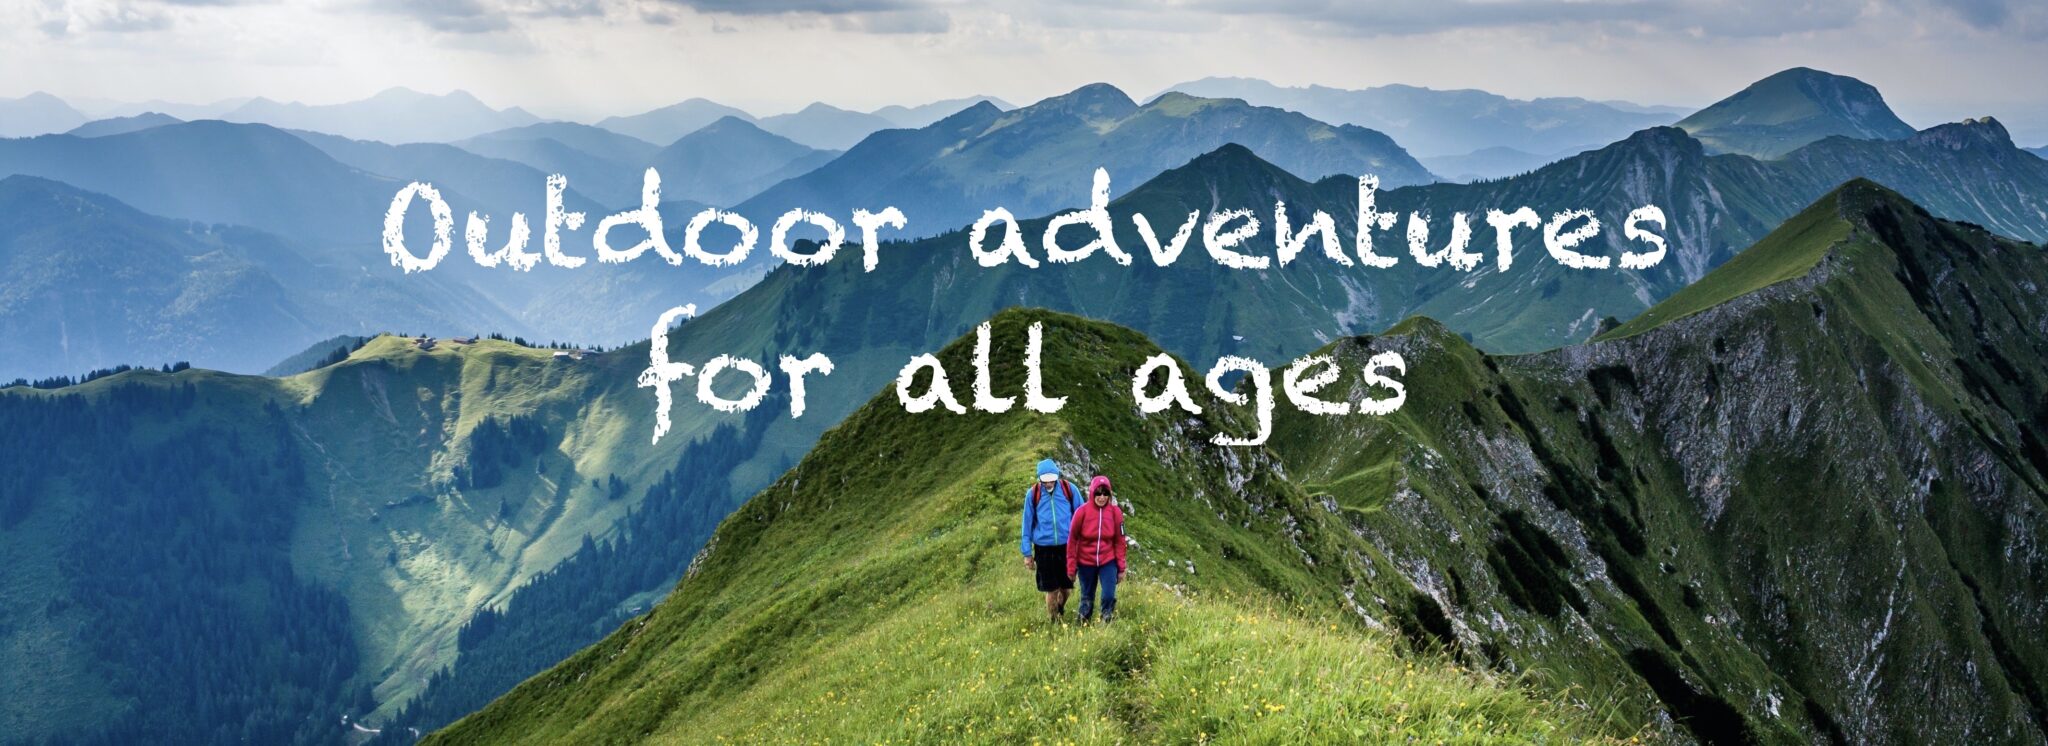 Outdoor adventures for all ages